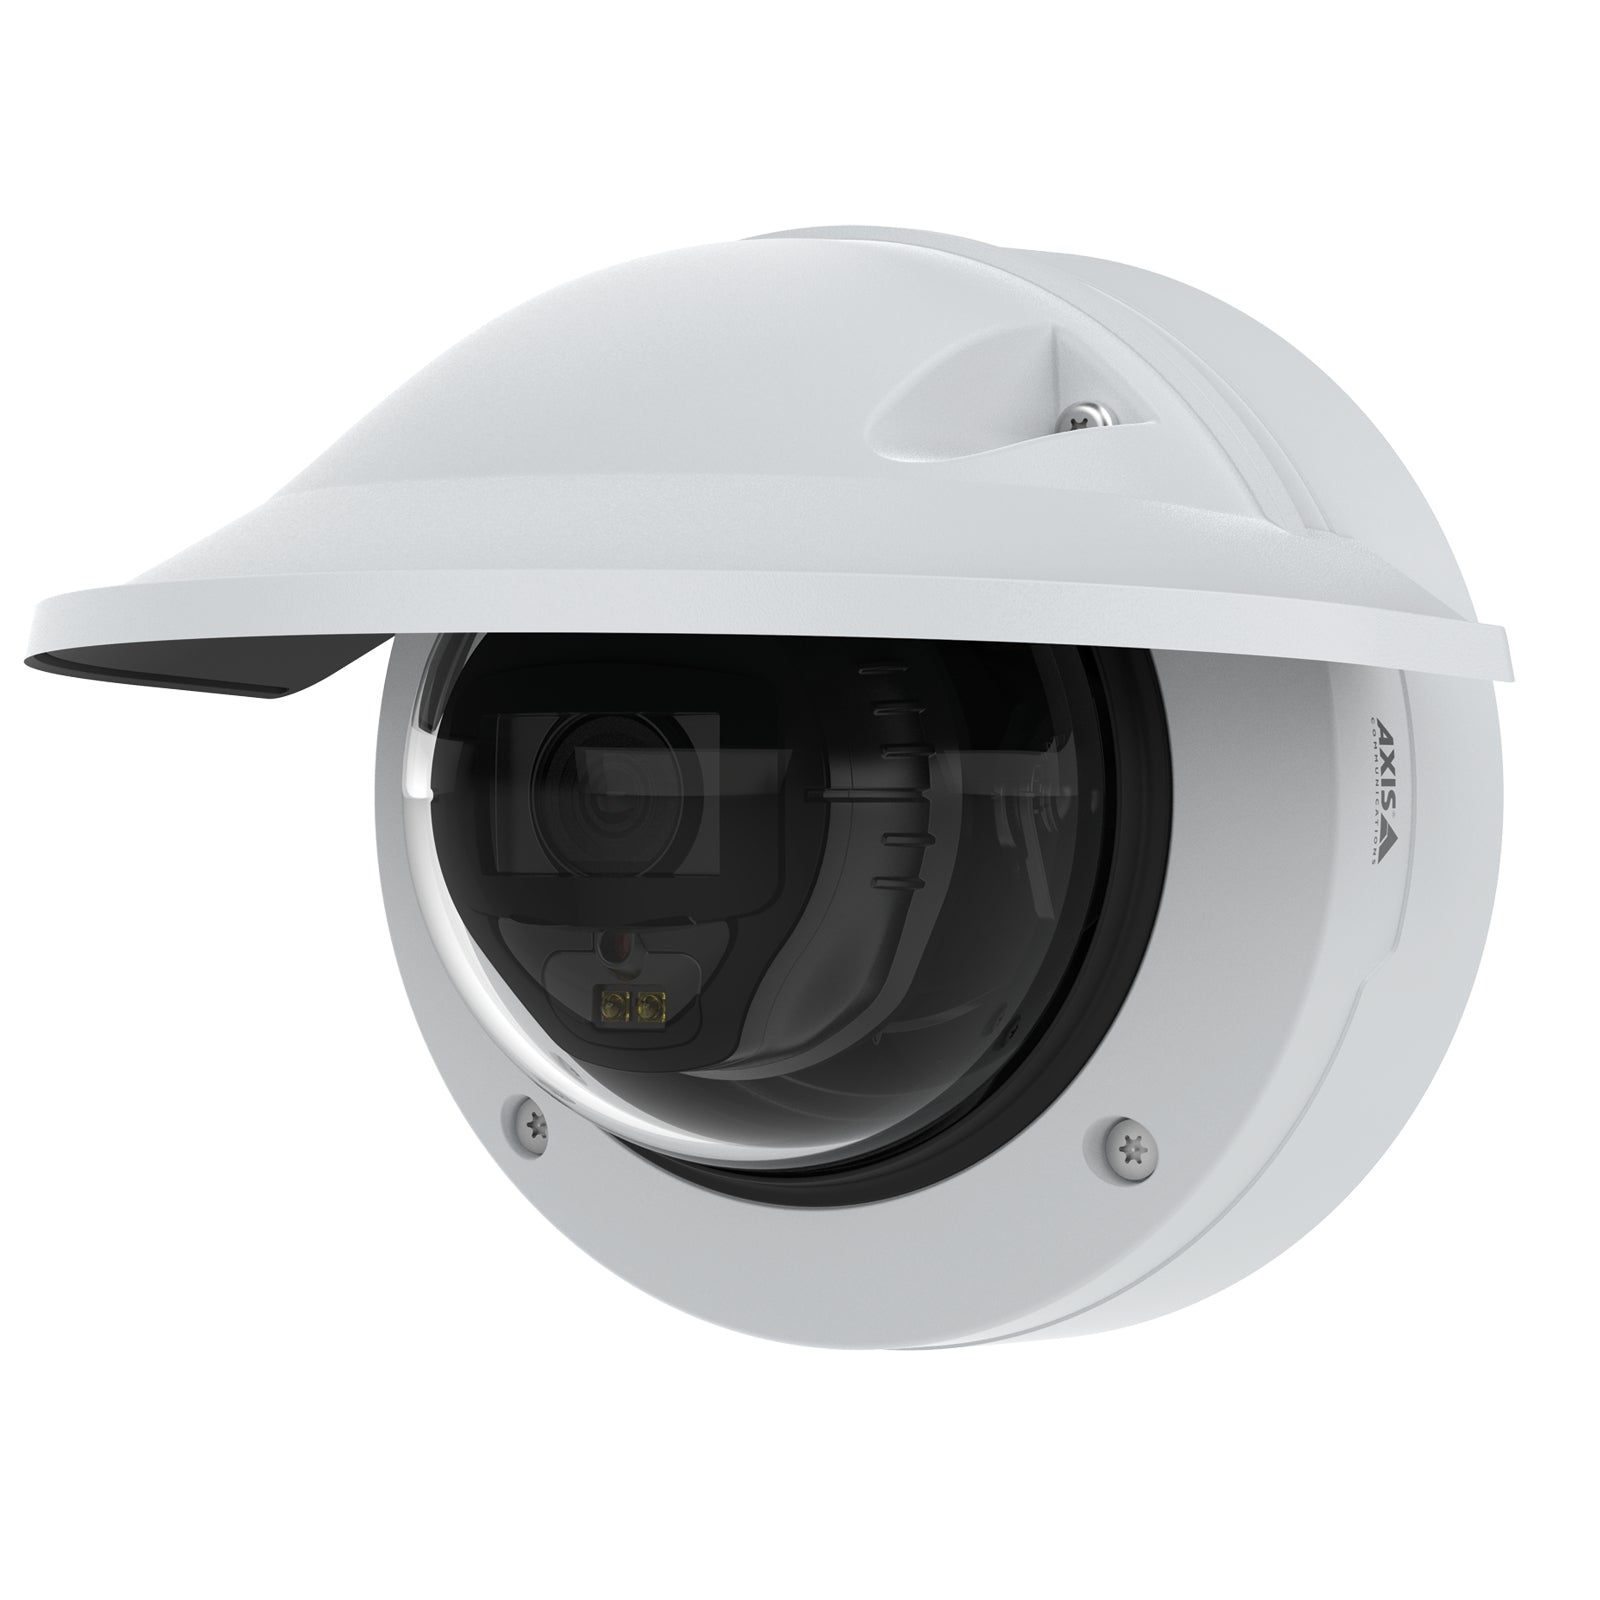 Axis 02330-001 security camera Dome IP security camera Outdoor 2592 x 1944 pixels Ceiling/wall